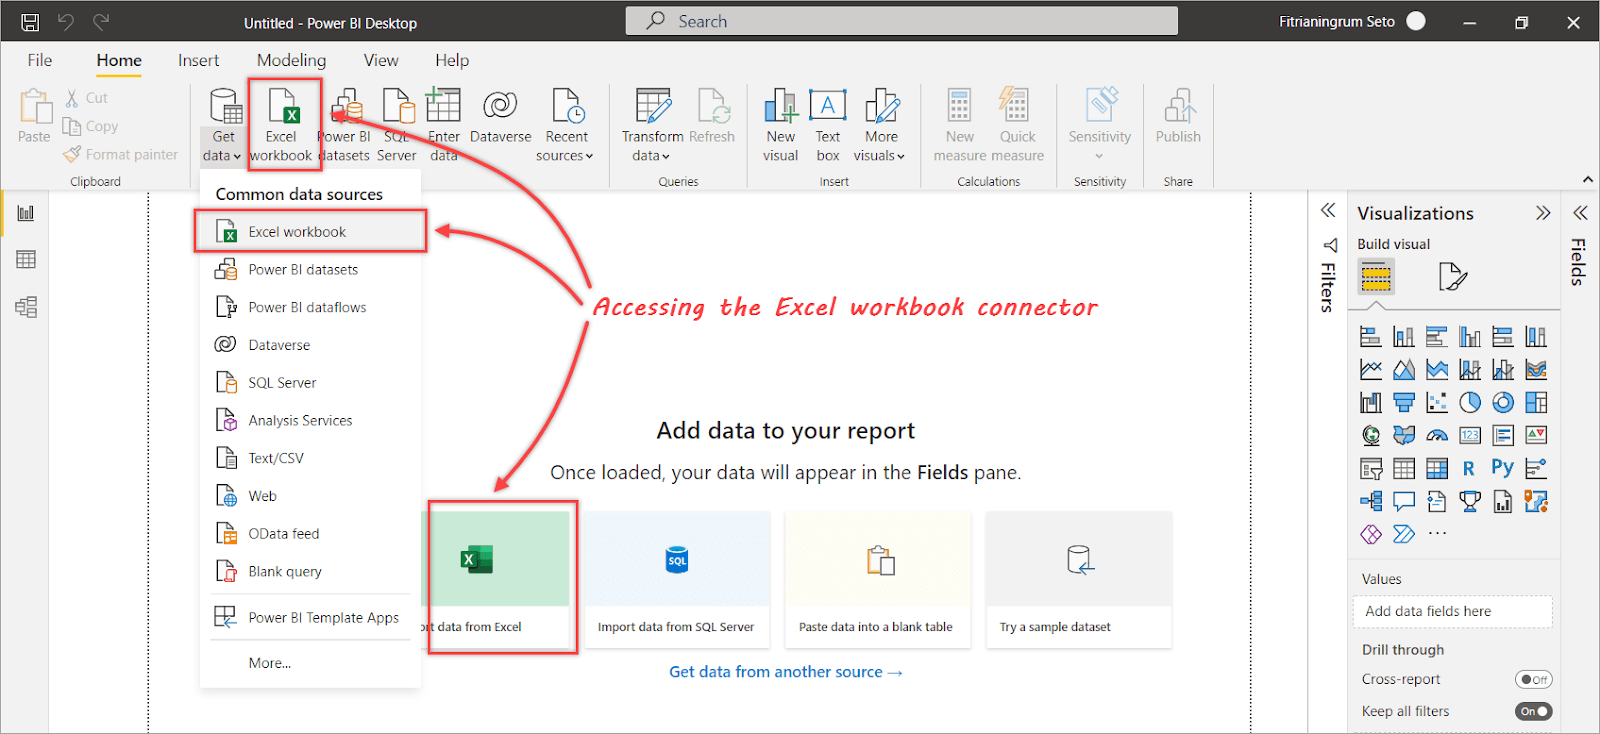 15 Accessing the Excel workbook connector in Power BI